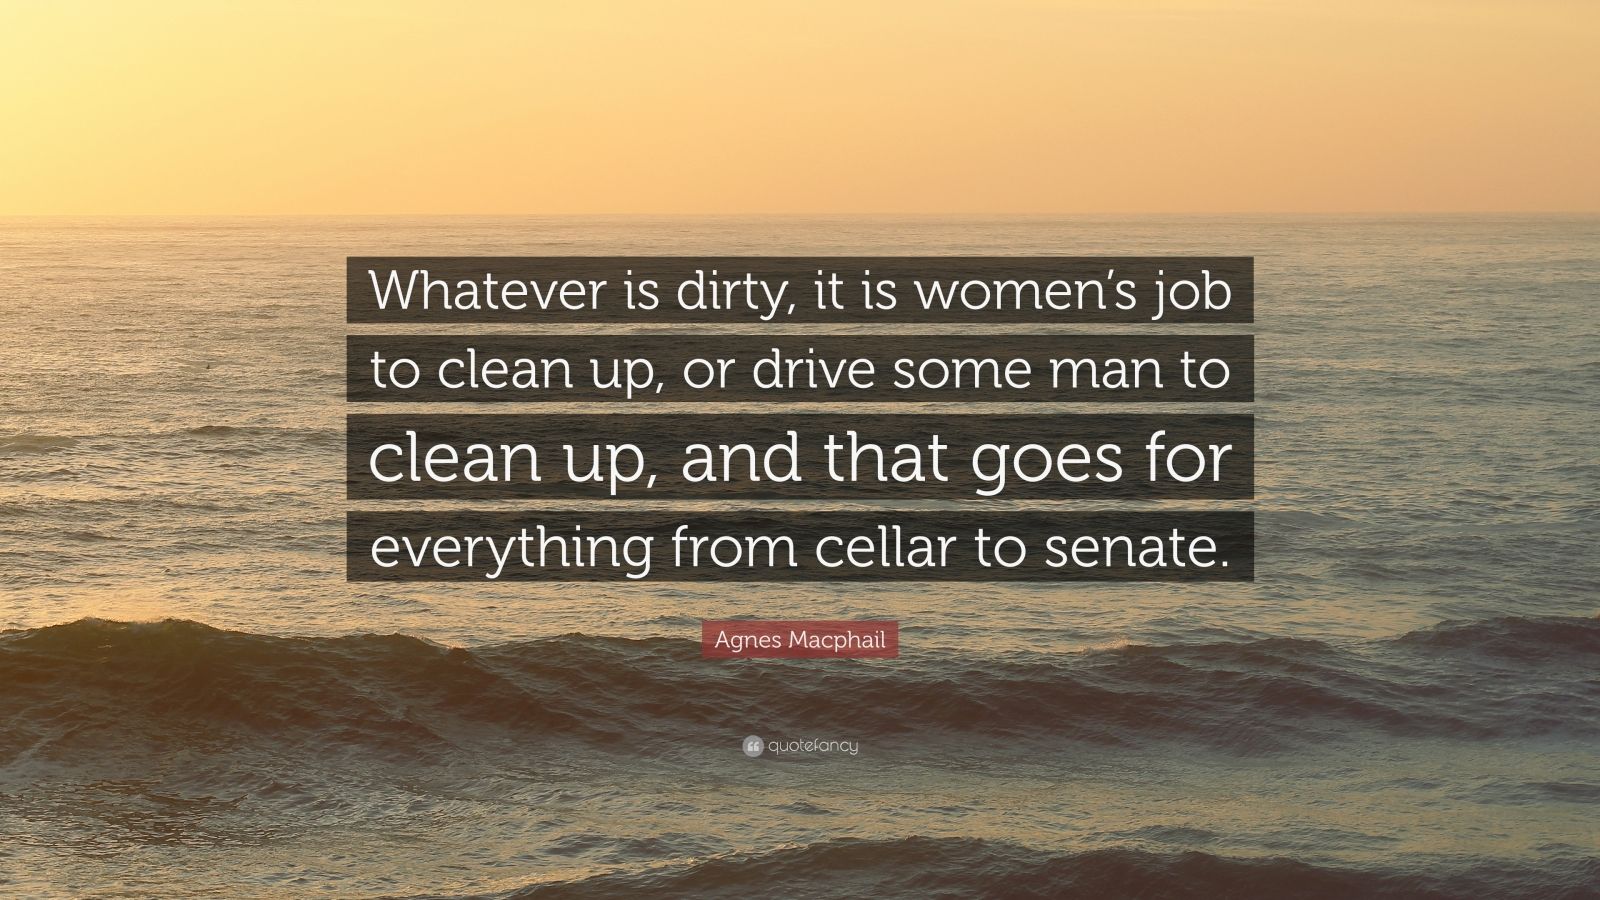 Agnes Macphail Quote: “Whatever is dirty, it is women’s job to clean up ...